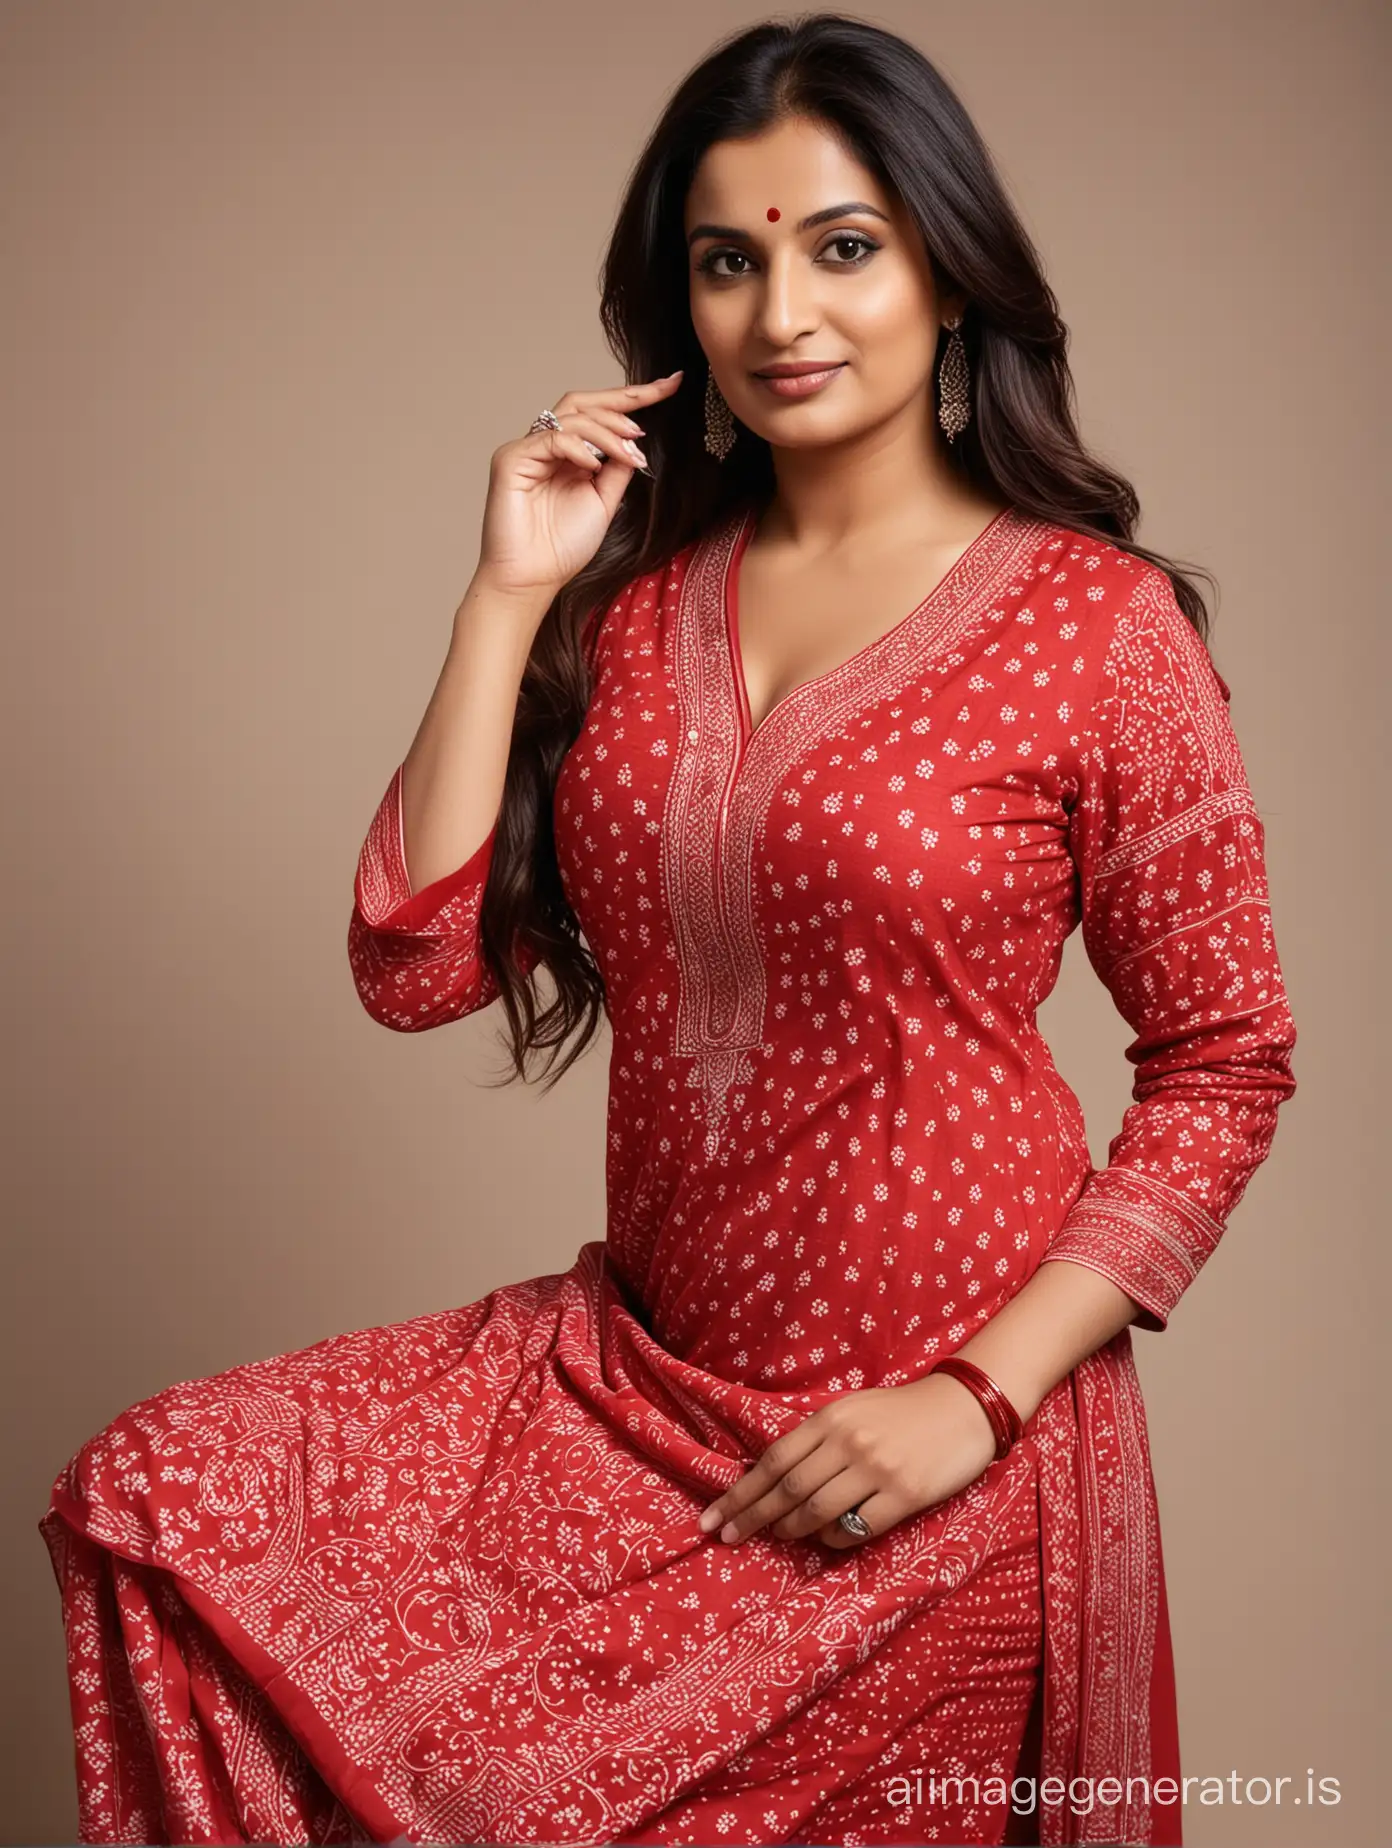 Generate full body  image of a 41 year old very busty and curvy completely  indian woman wearing salwar kameez and wearing red colour sindur in forehead and red and white bangles in hand